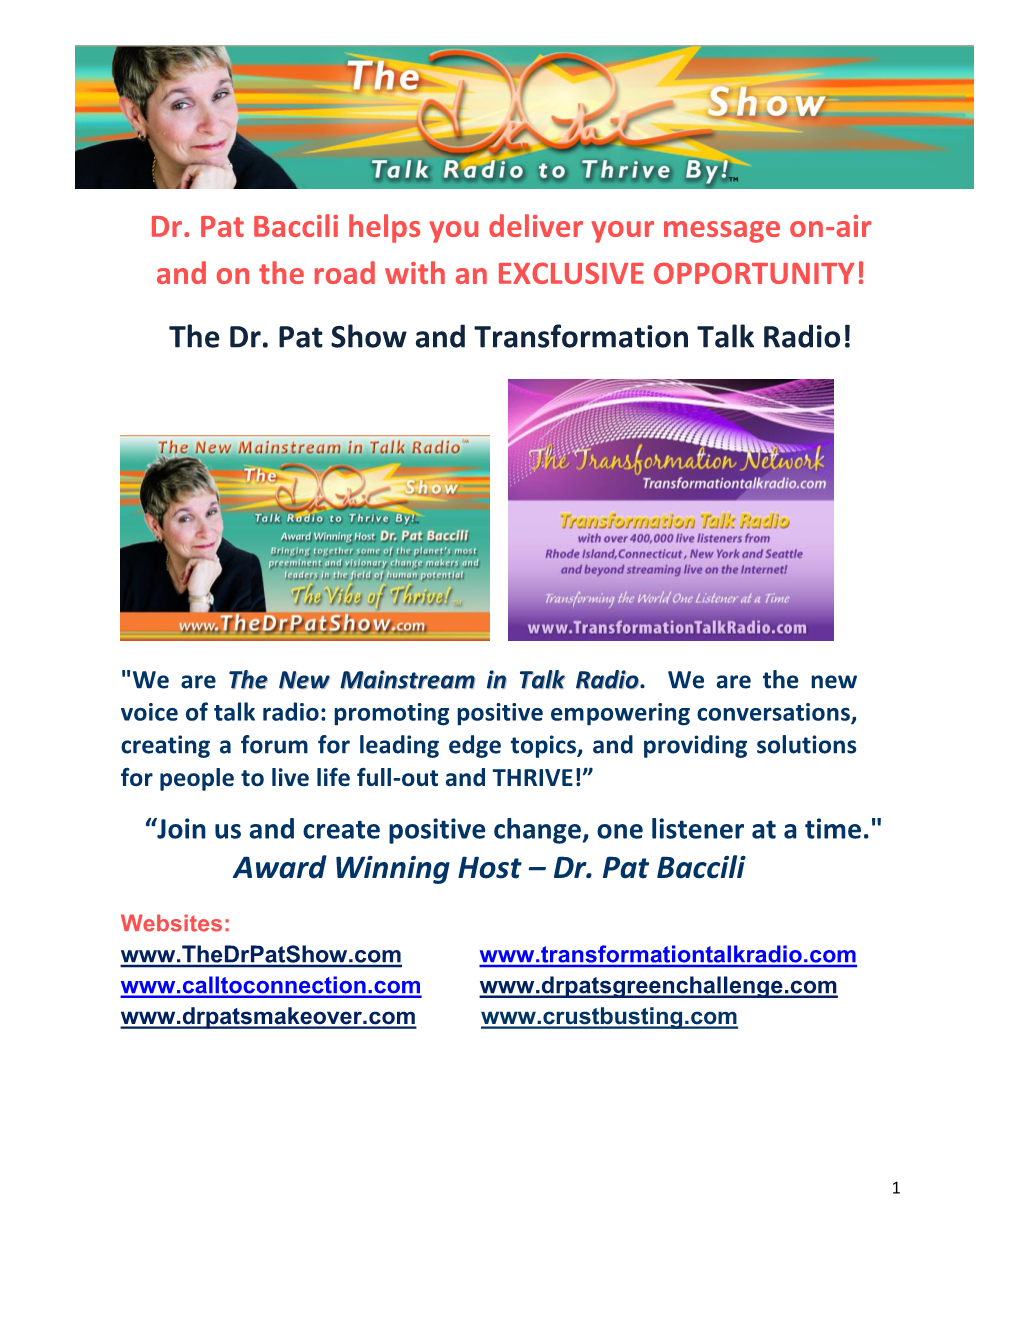 The Dr. Pat Show and Transformation Talk Radio!